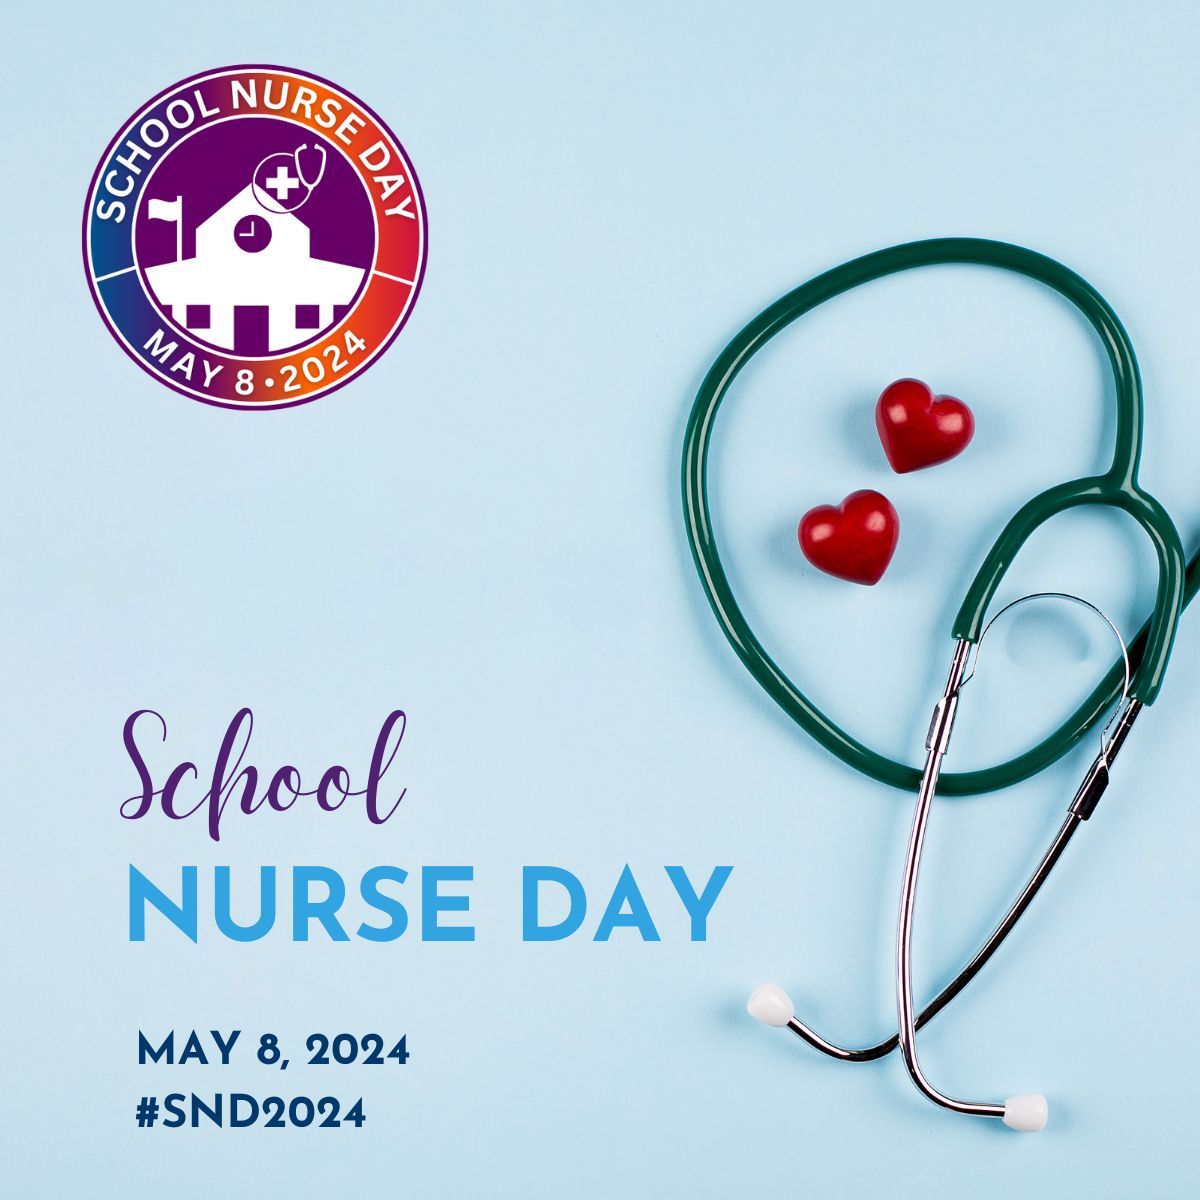 Happy School Nurse Day! Thank you to our DGS nurses Gloria E. Barrera, Mary D'Aquila, and Jade Bottoms, DGN nurses Mary Beth Tamm, Kathleen McDonald, Victoria Yates, and our T99 nurses Bryan Yaneza and Cindy Logan. #99learns #DGSPride #WeAreDGN